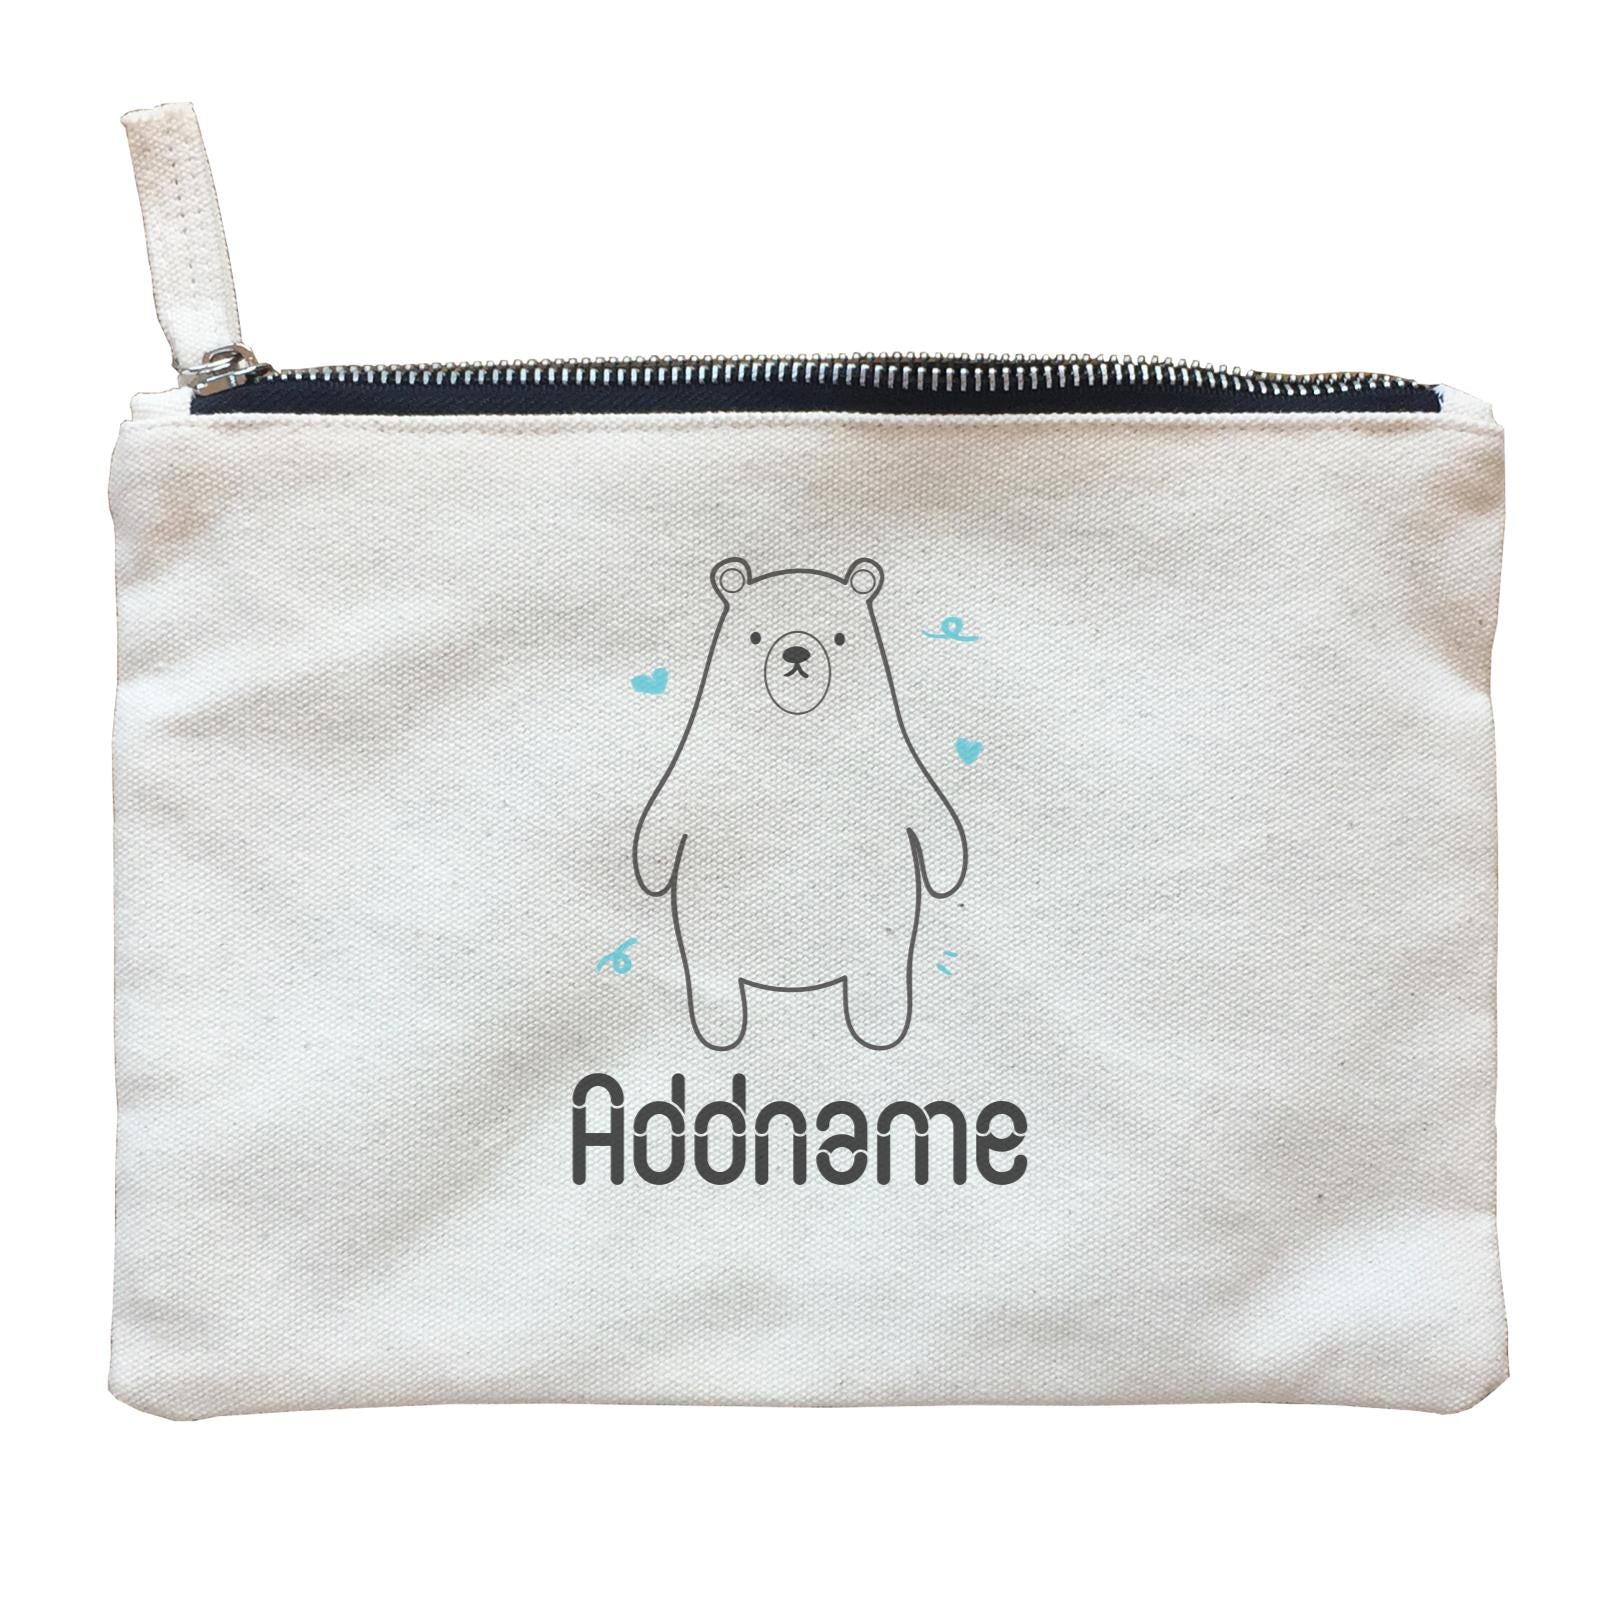 Coloring Outline Cute Hand Drawn Animals Cute Bear Addname Zipper Pouch